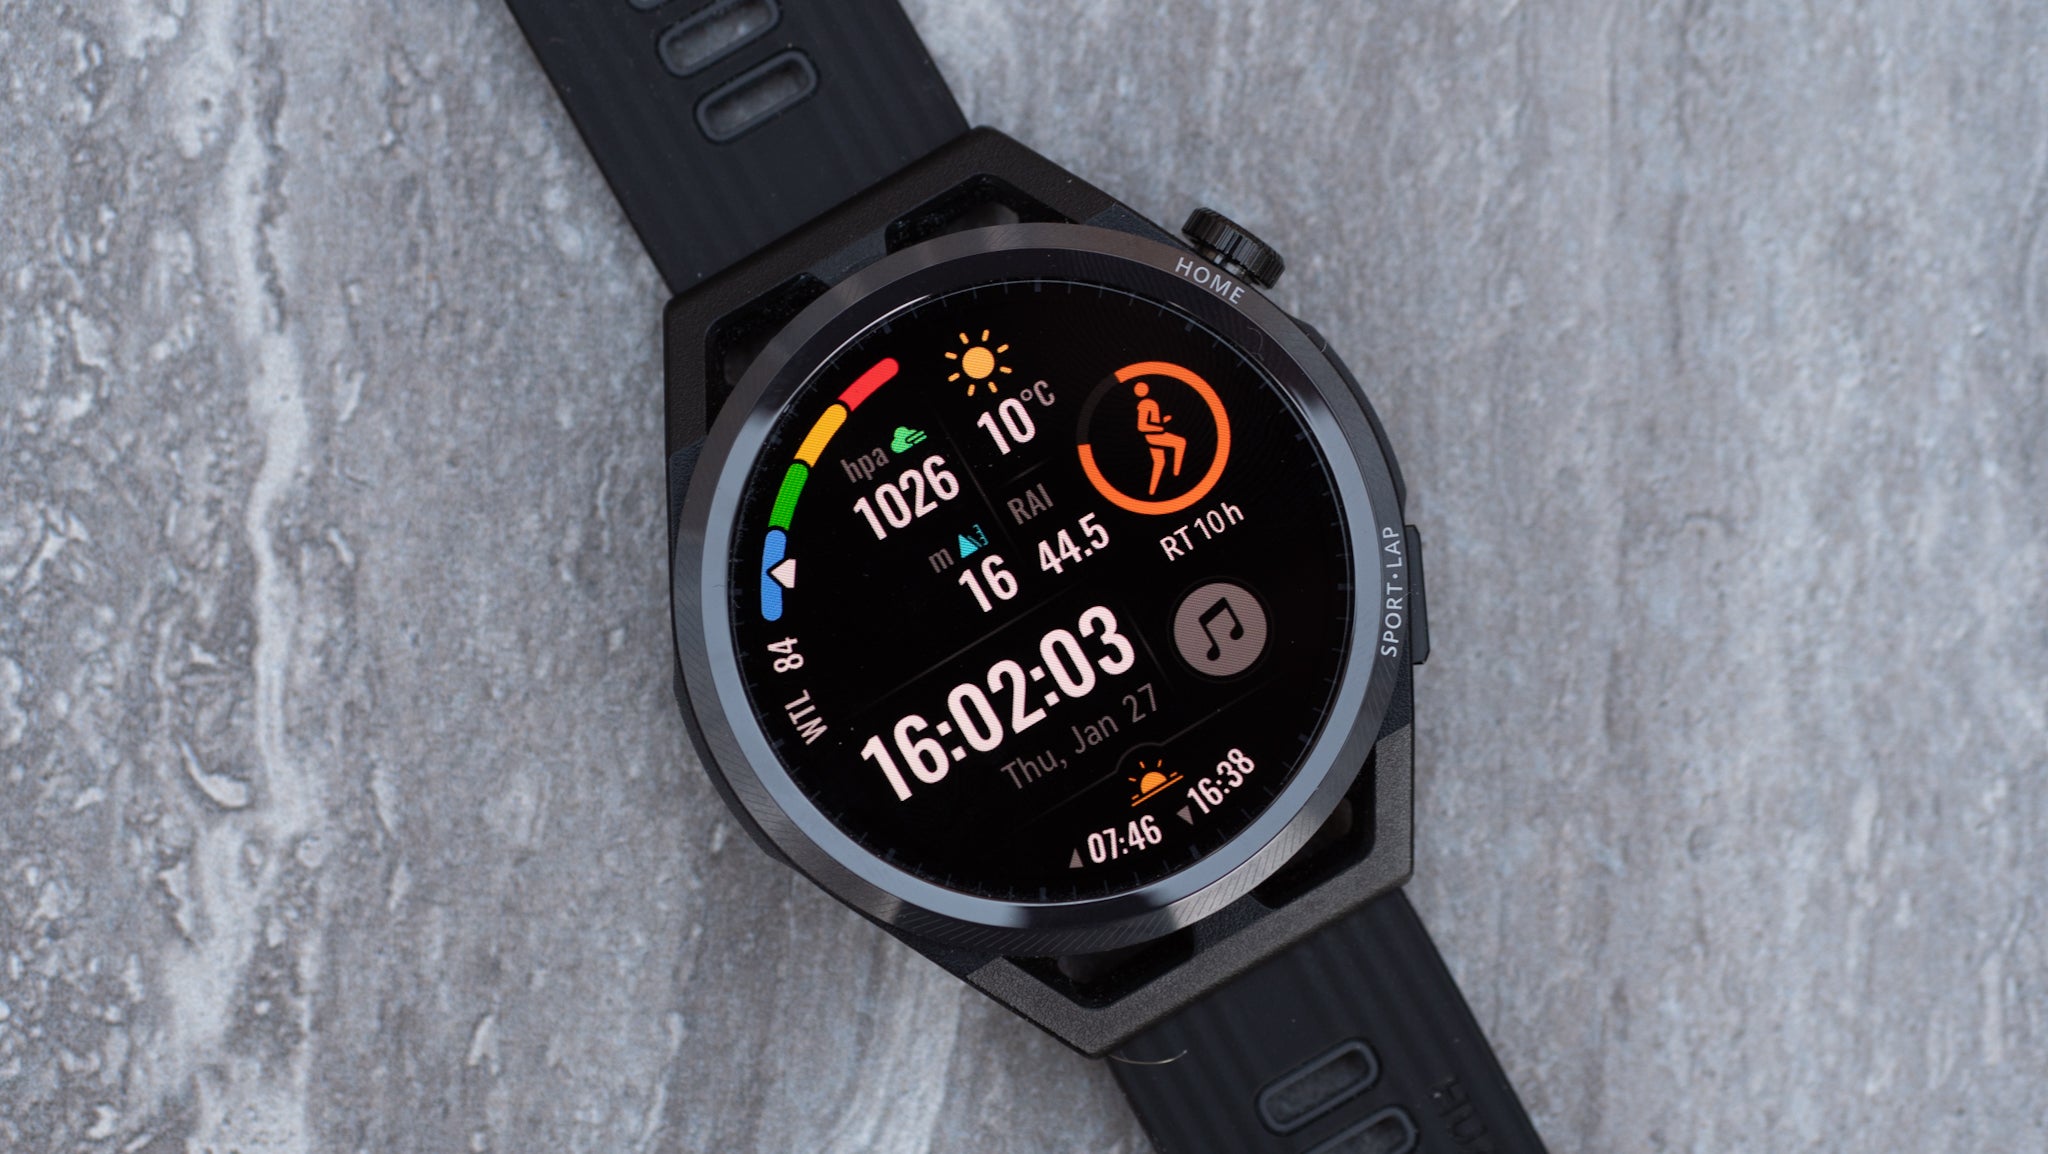 Huawei Watch GT Runner review: The best smartwatch from Huawei yet 